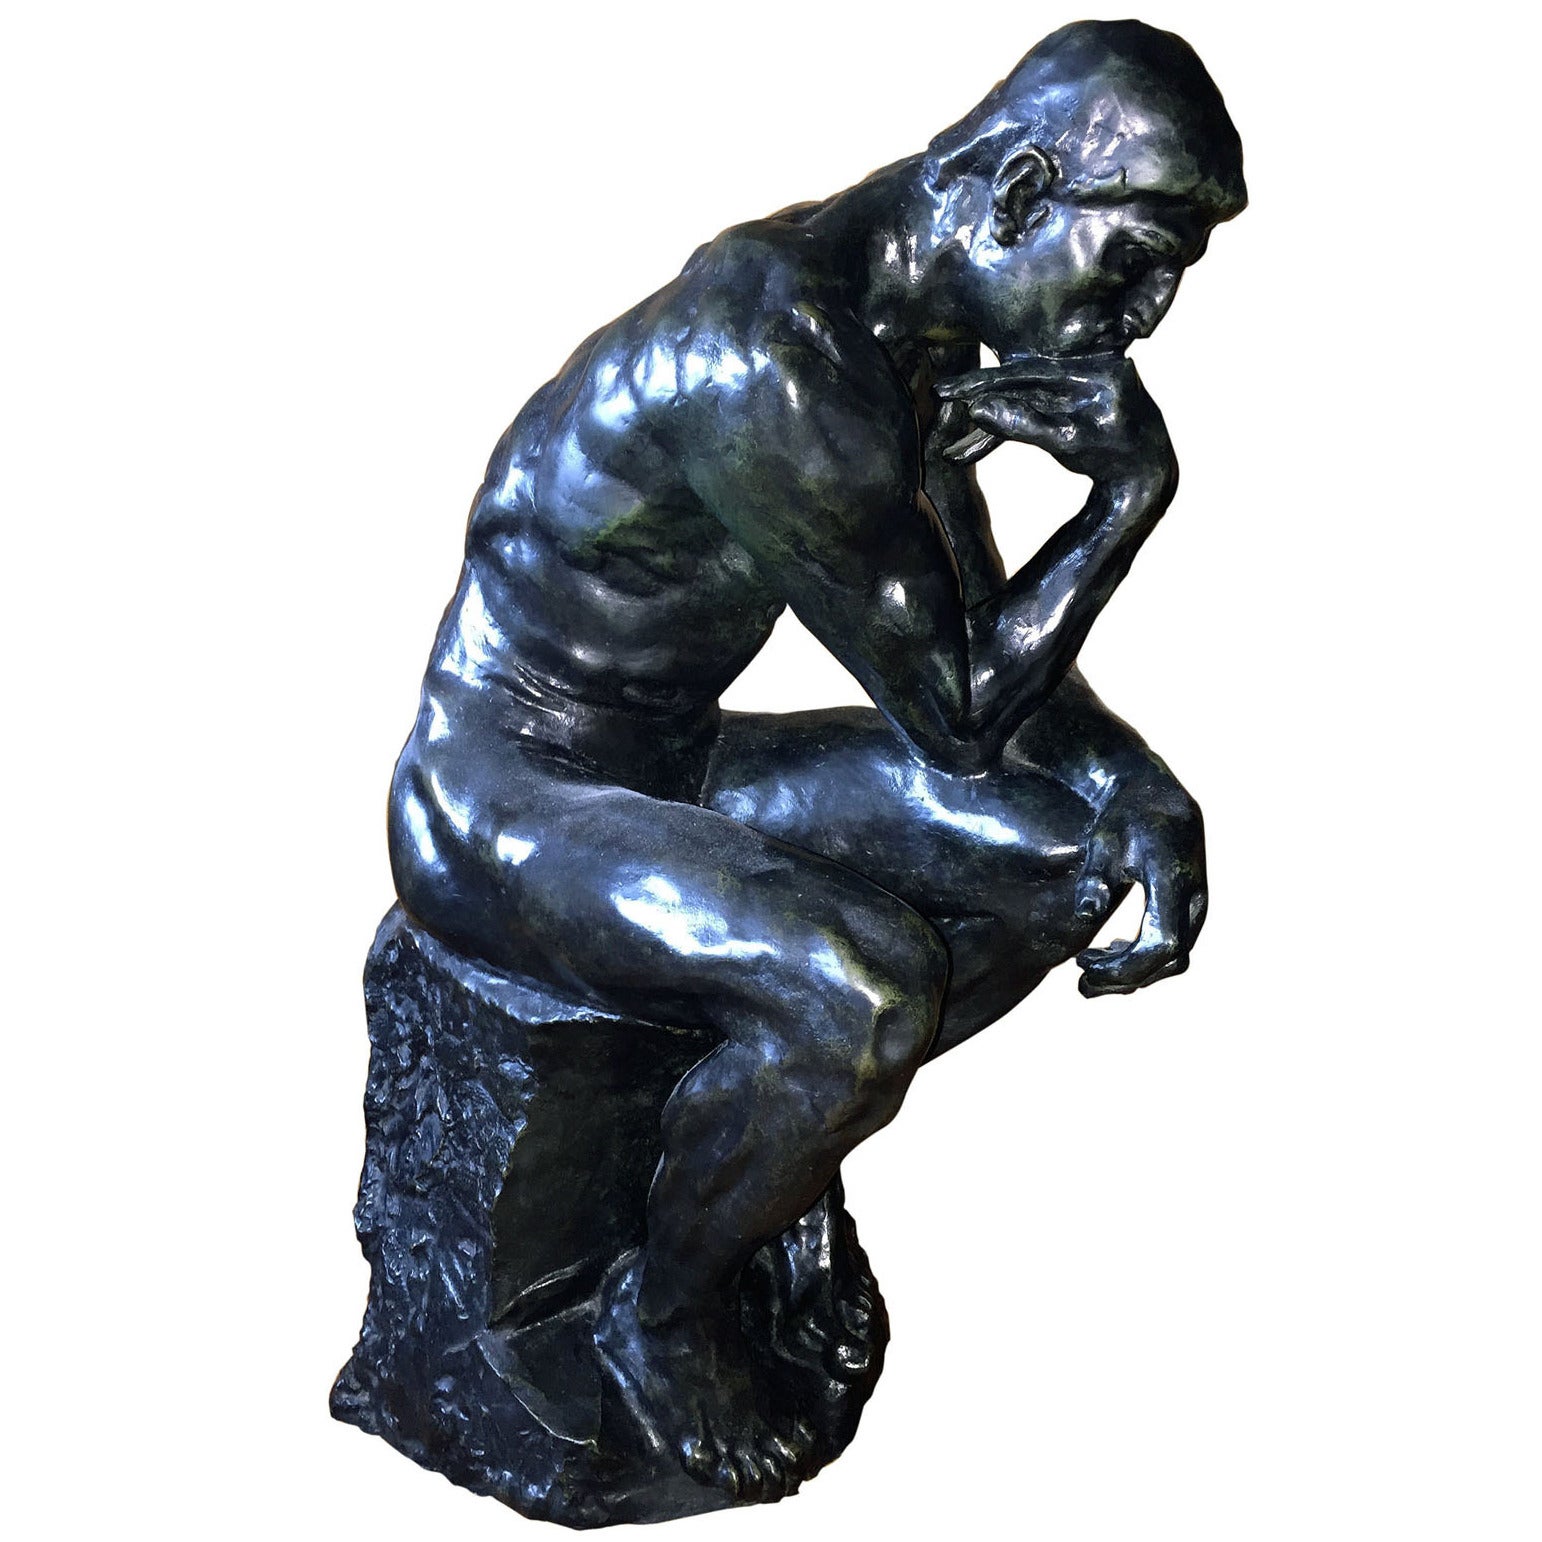 Auguste Rodin “The Thinker” Bronze Sculpture For Sale